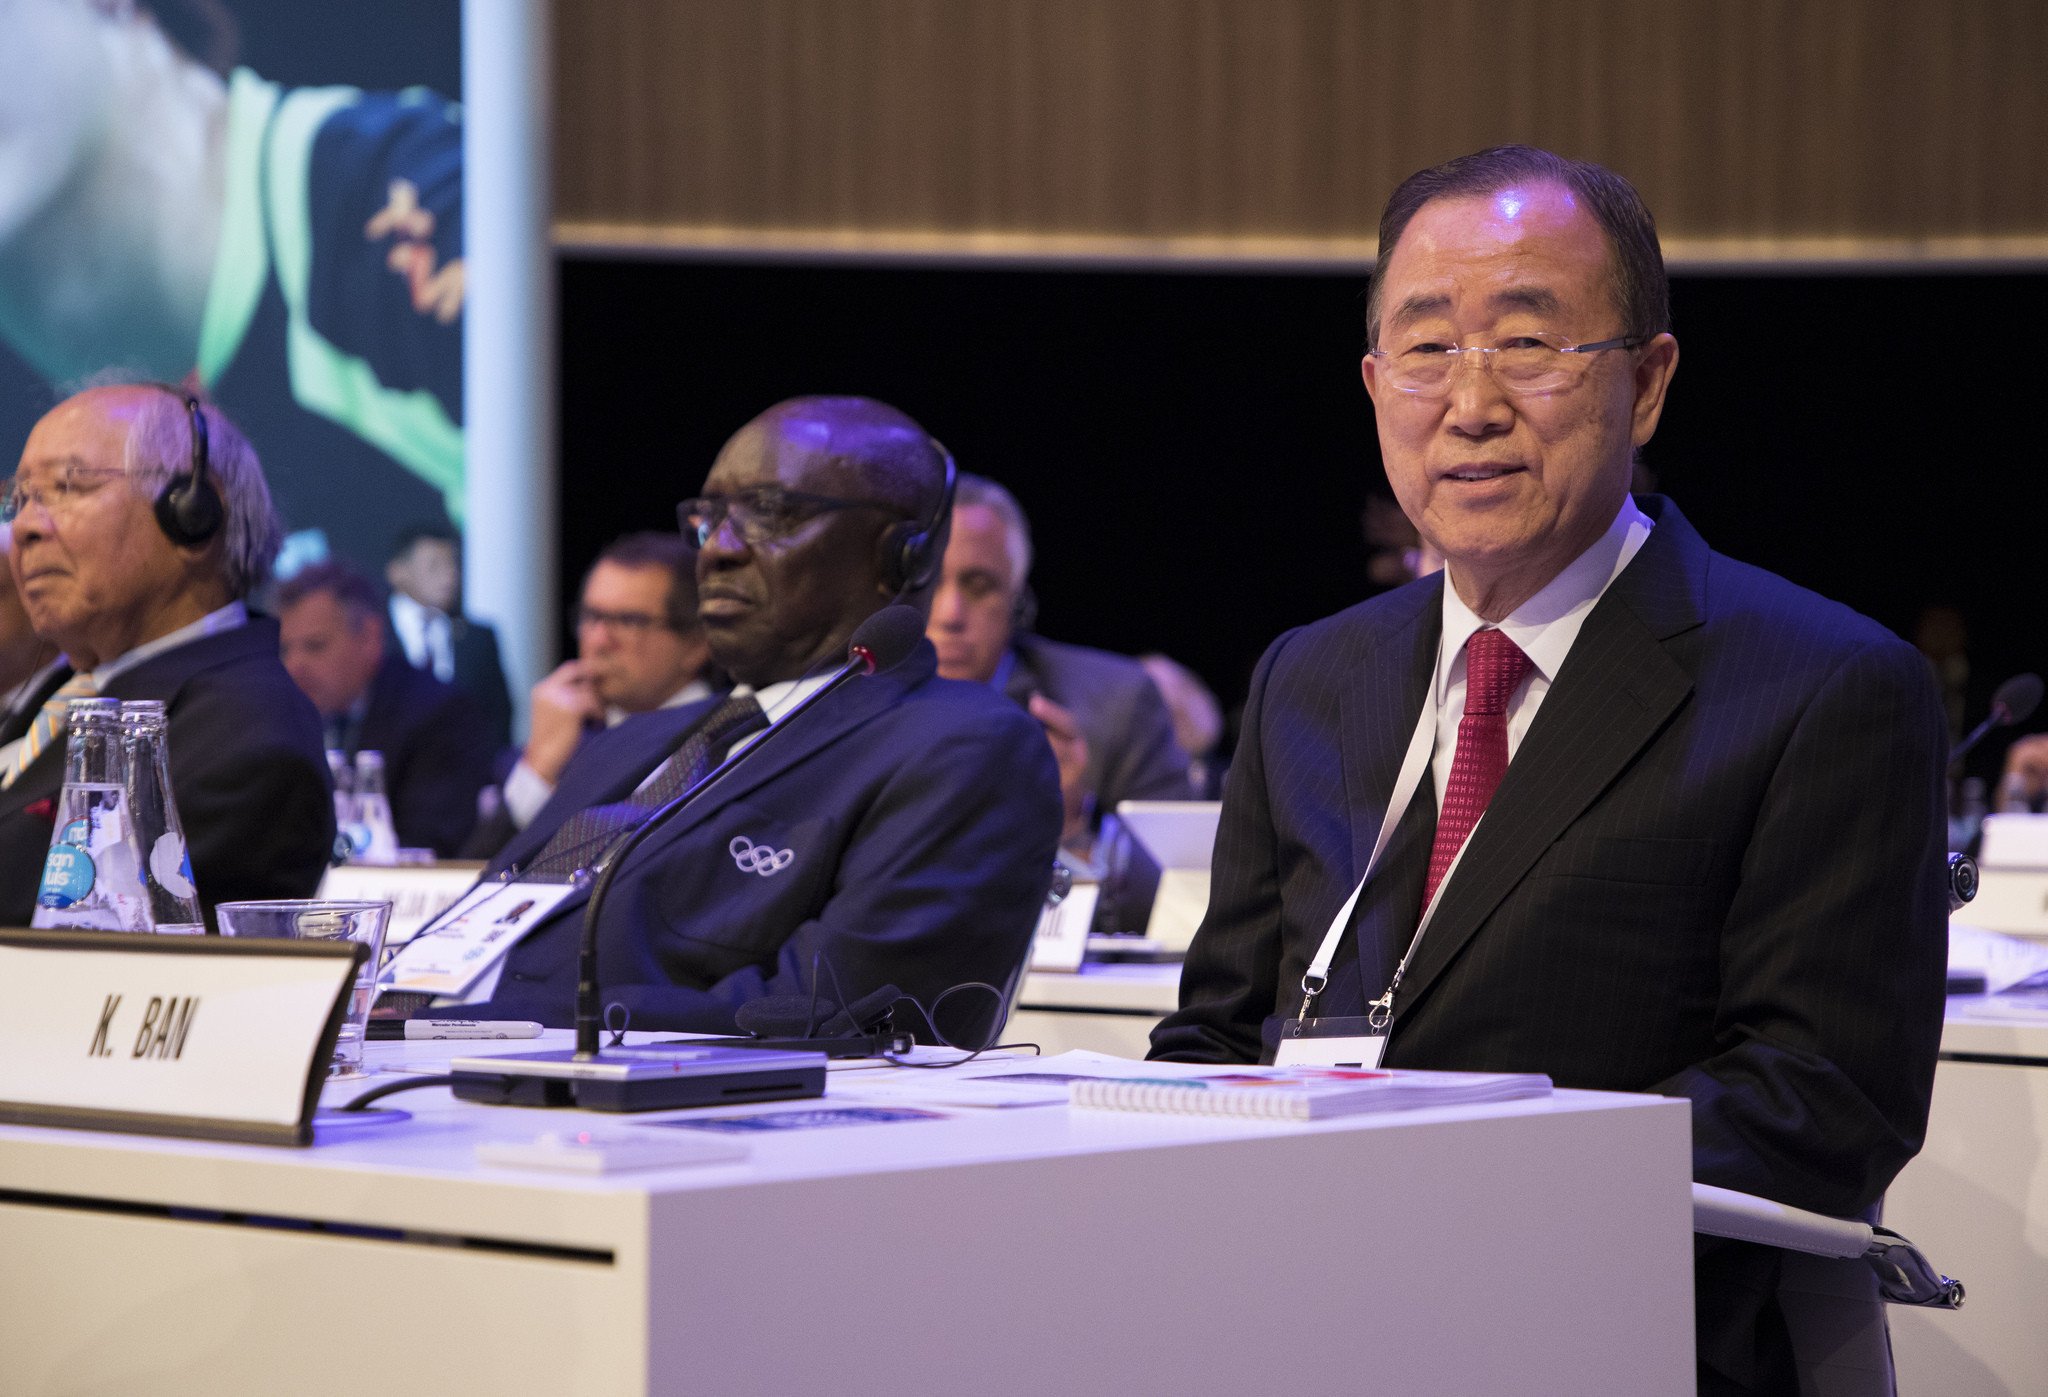 Ban Ki-moon vowed to enhance the accountability and transparency of the IOC following his election ©IOC